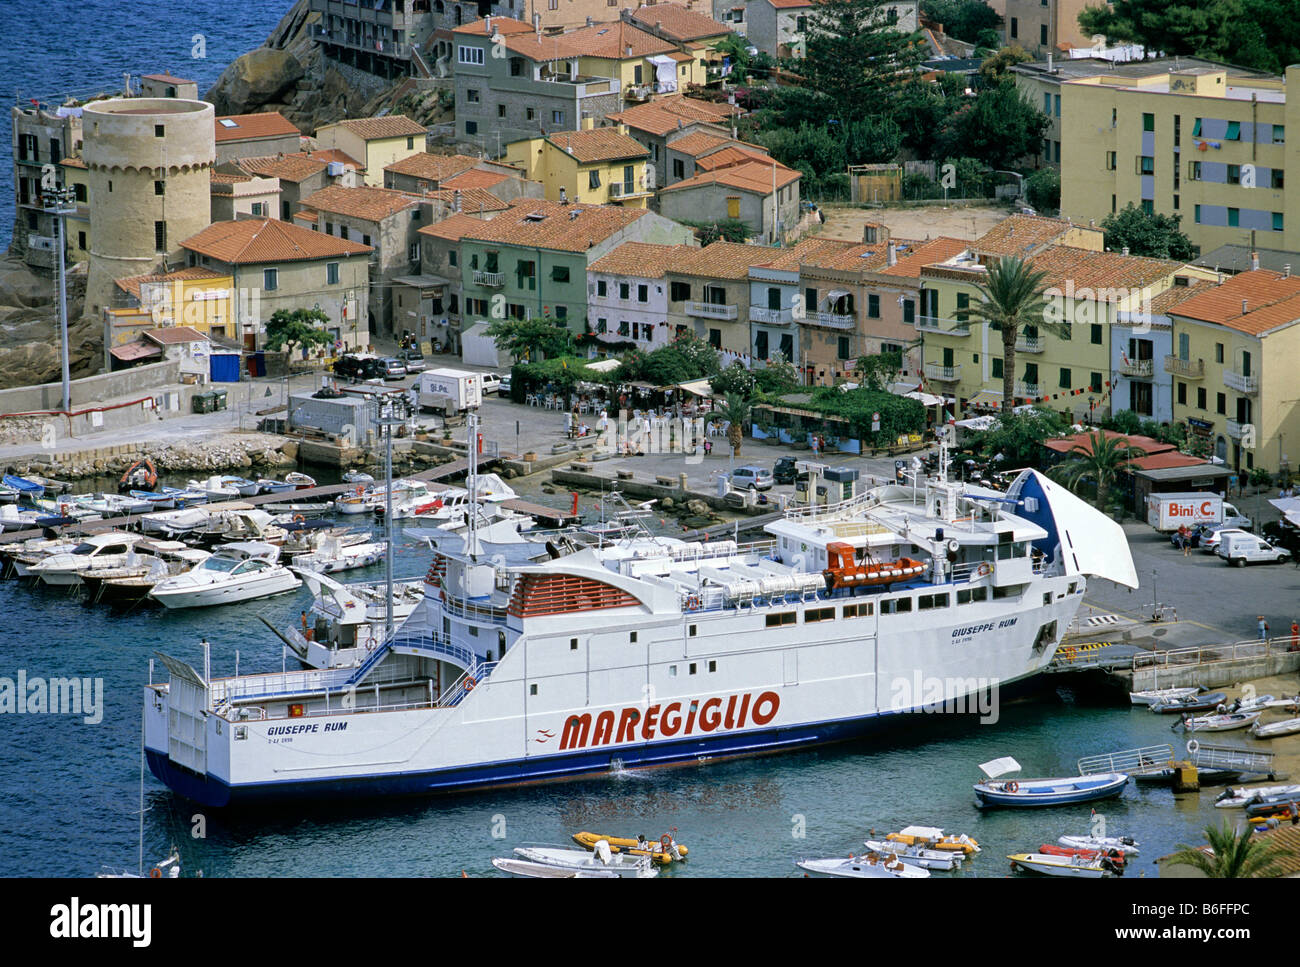 Ferryboat in the harbour of Giglio Porto, Isola del Giglio, province of Grosseto, Tuscany, Italy, Europe Stock Photo